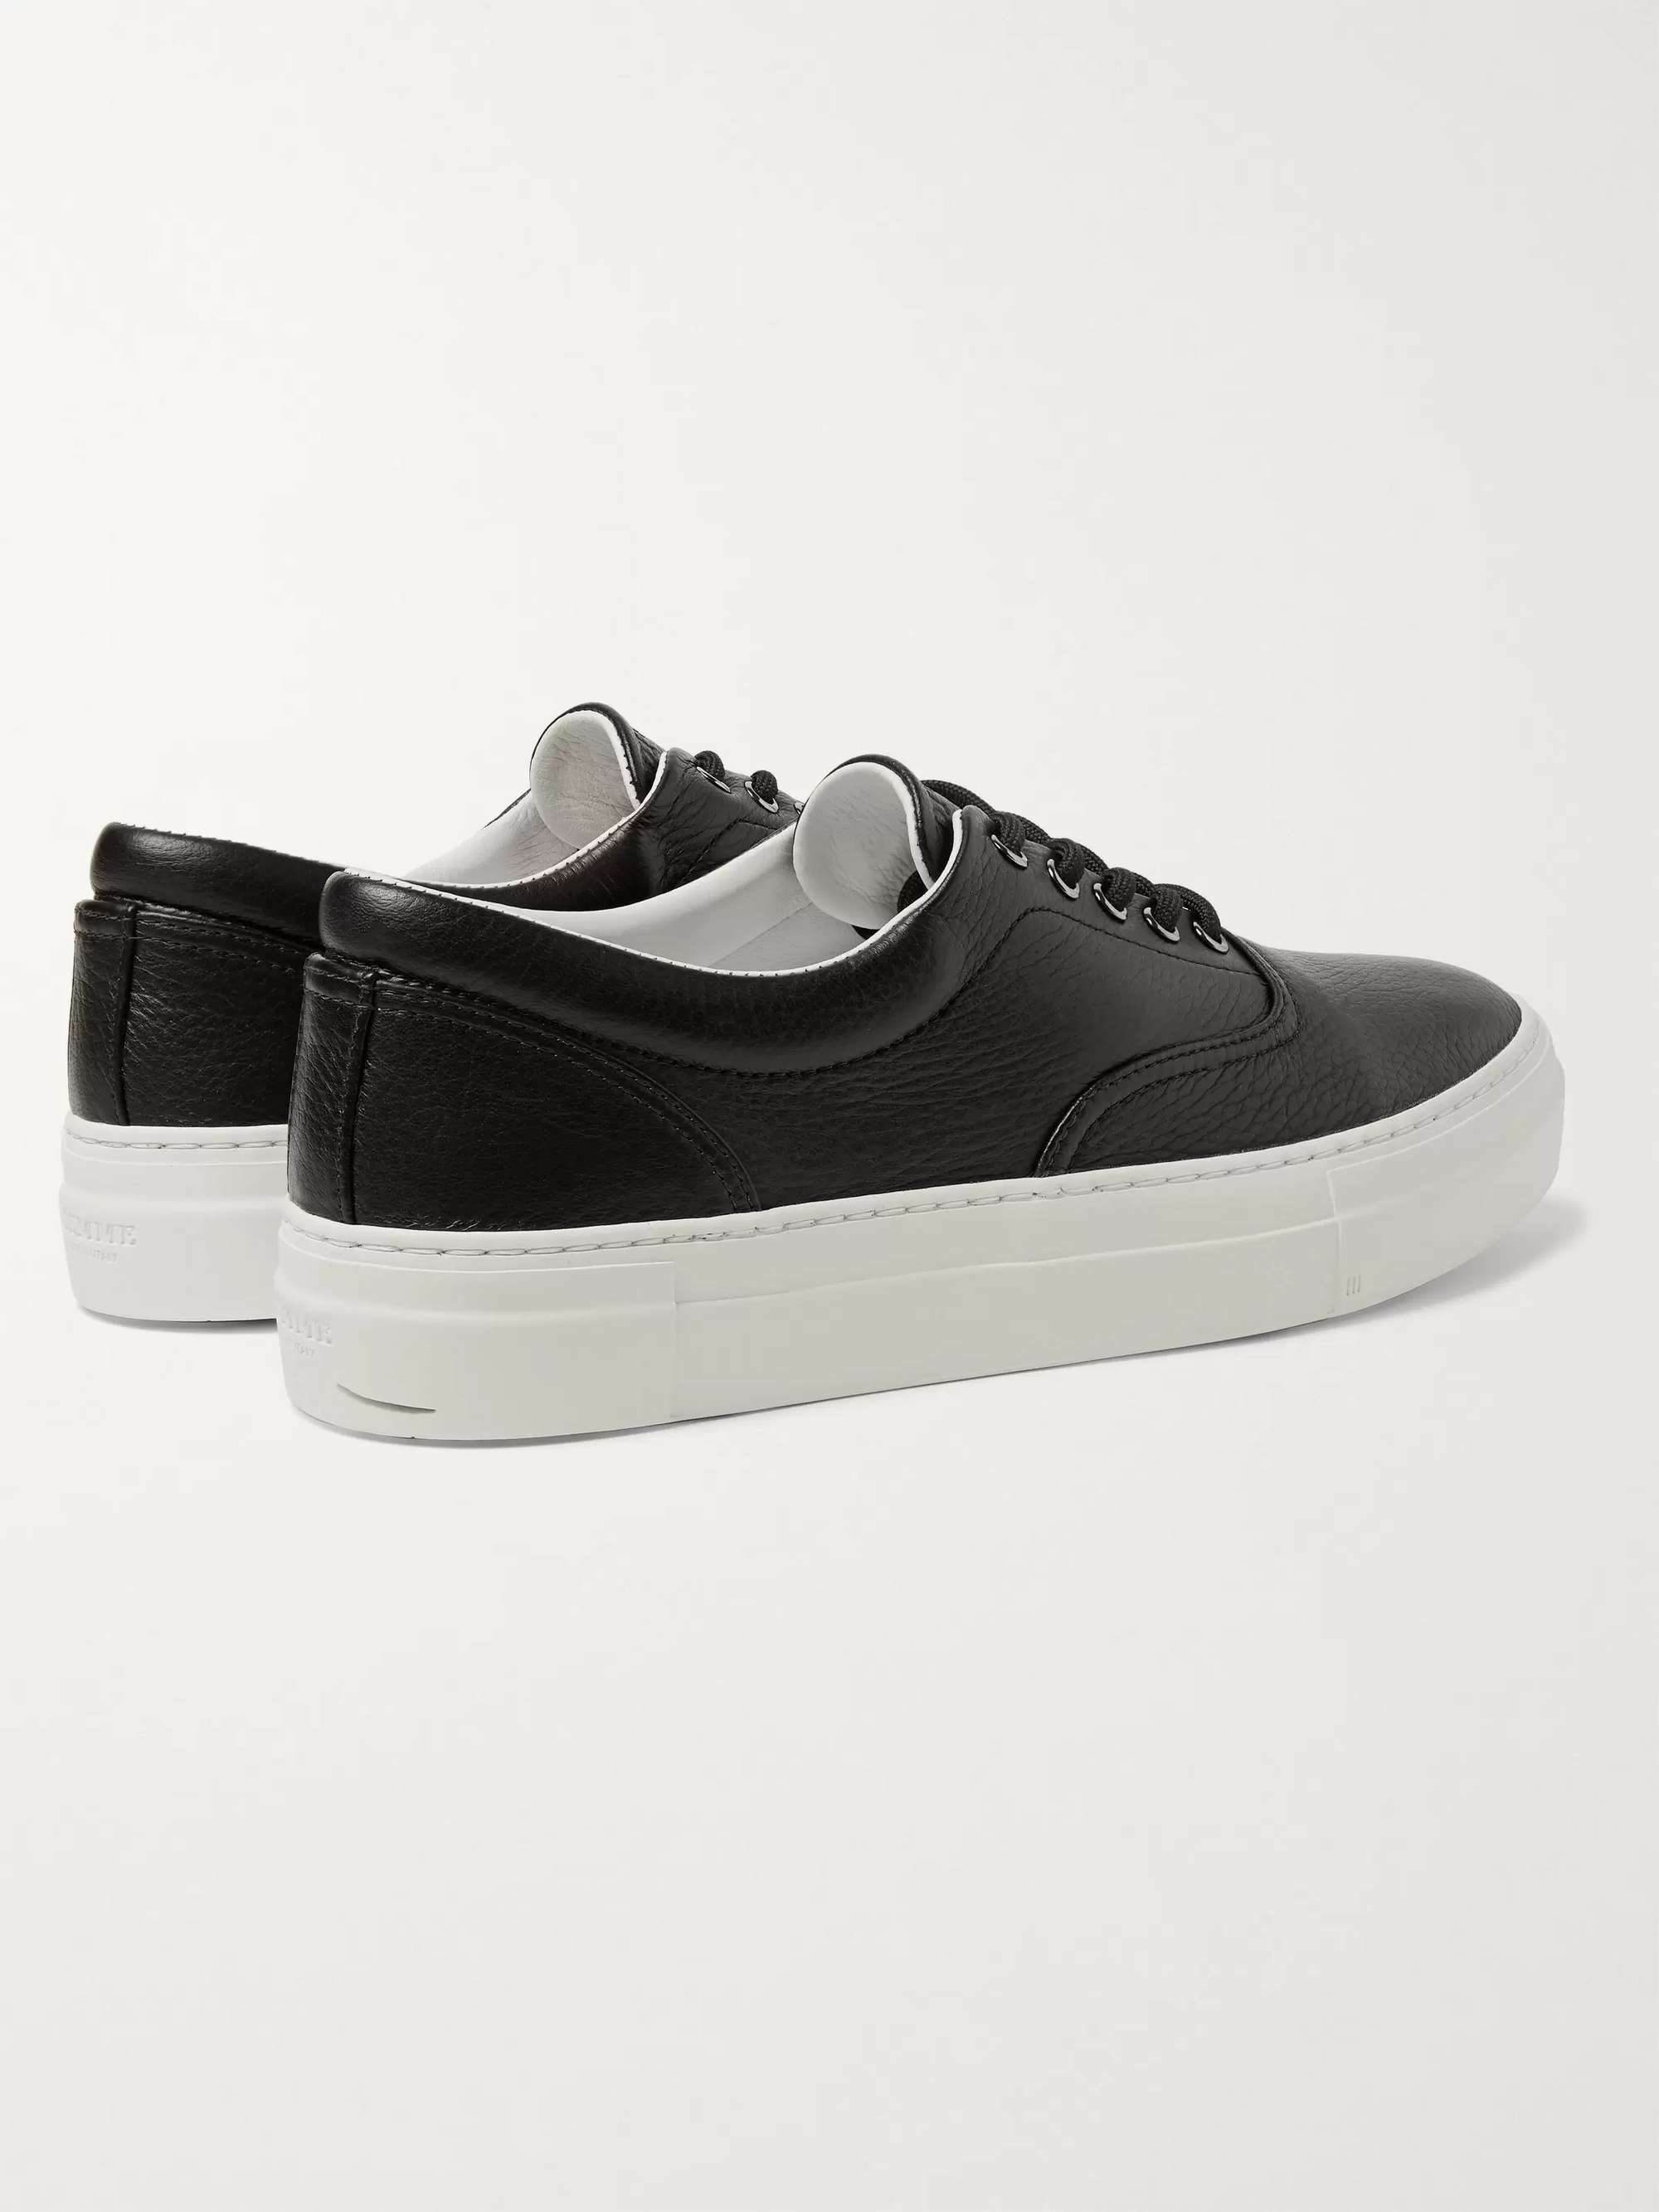 DIEMME Iseo Textured-Leather Sneakers for Men | MR PORTER